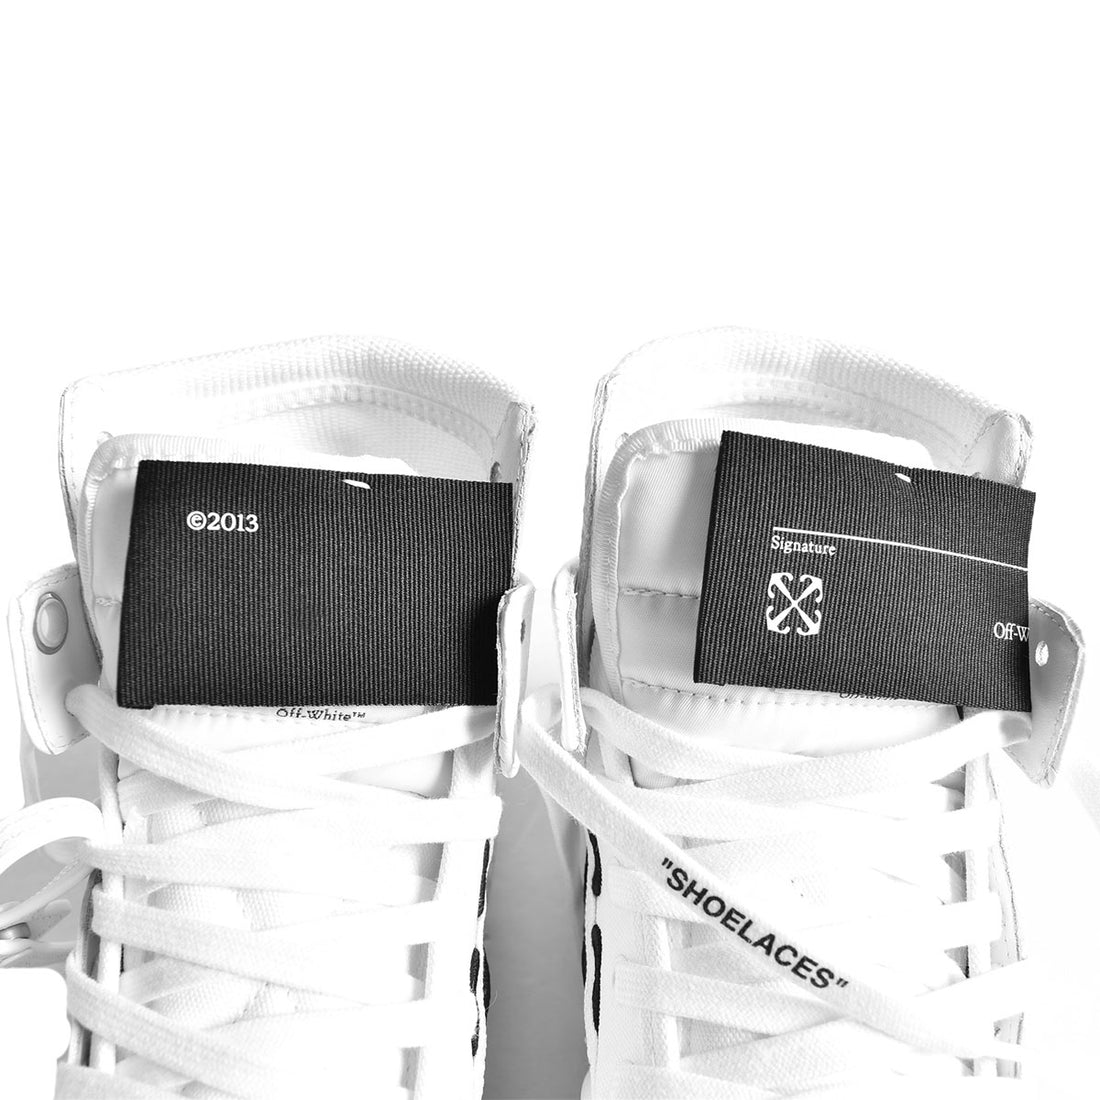 [Off-White]3.0 OFF COURT CALF LEATHER/WHITE BLACK(OMIR24-SLG0001)